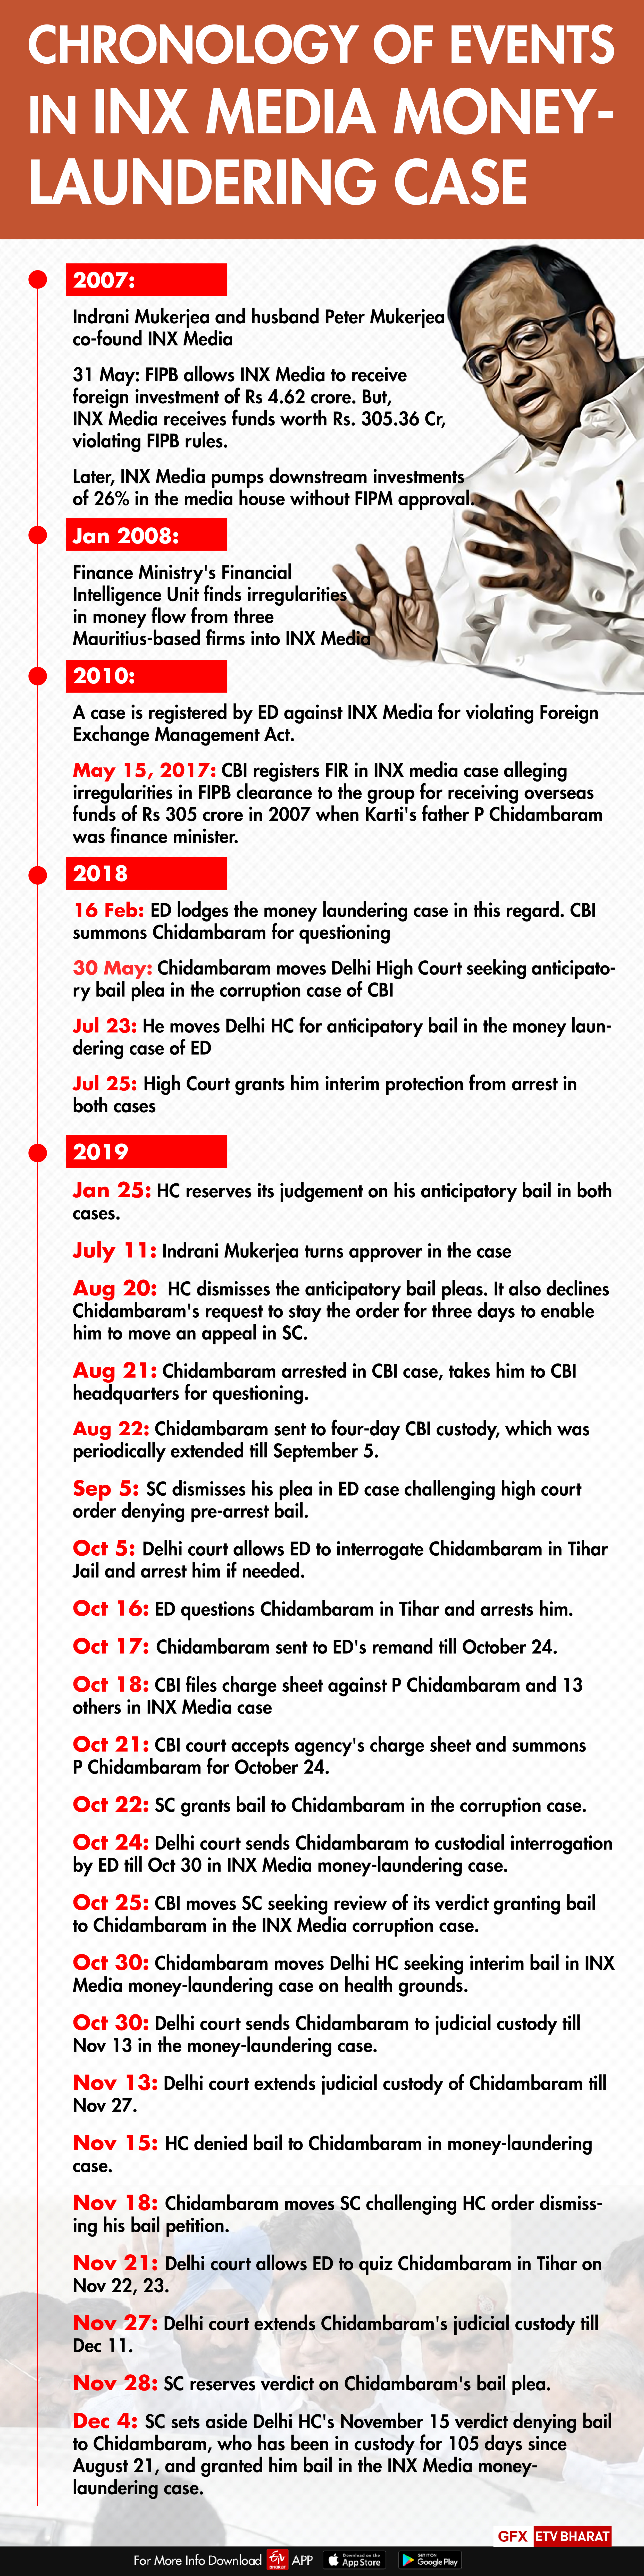 Chronology of events in INX Media money-laundering case